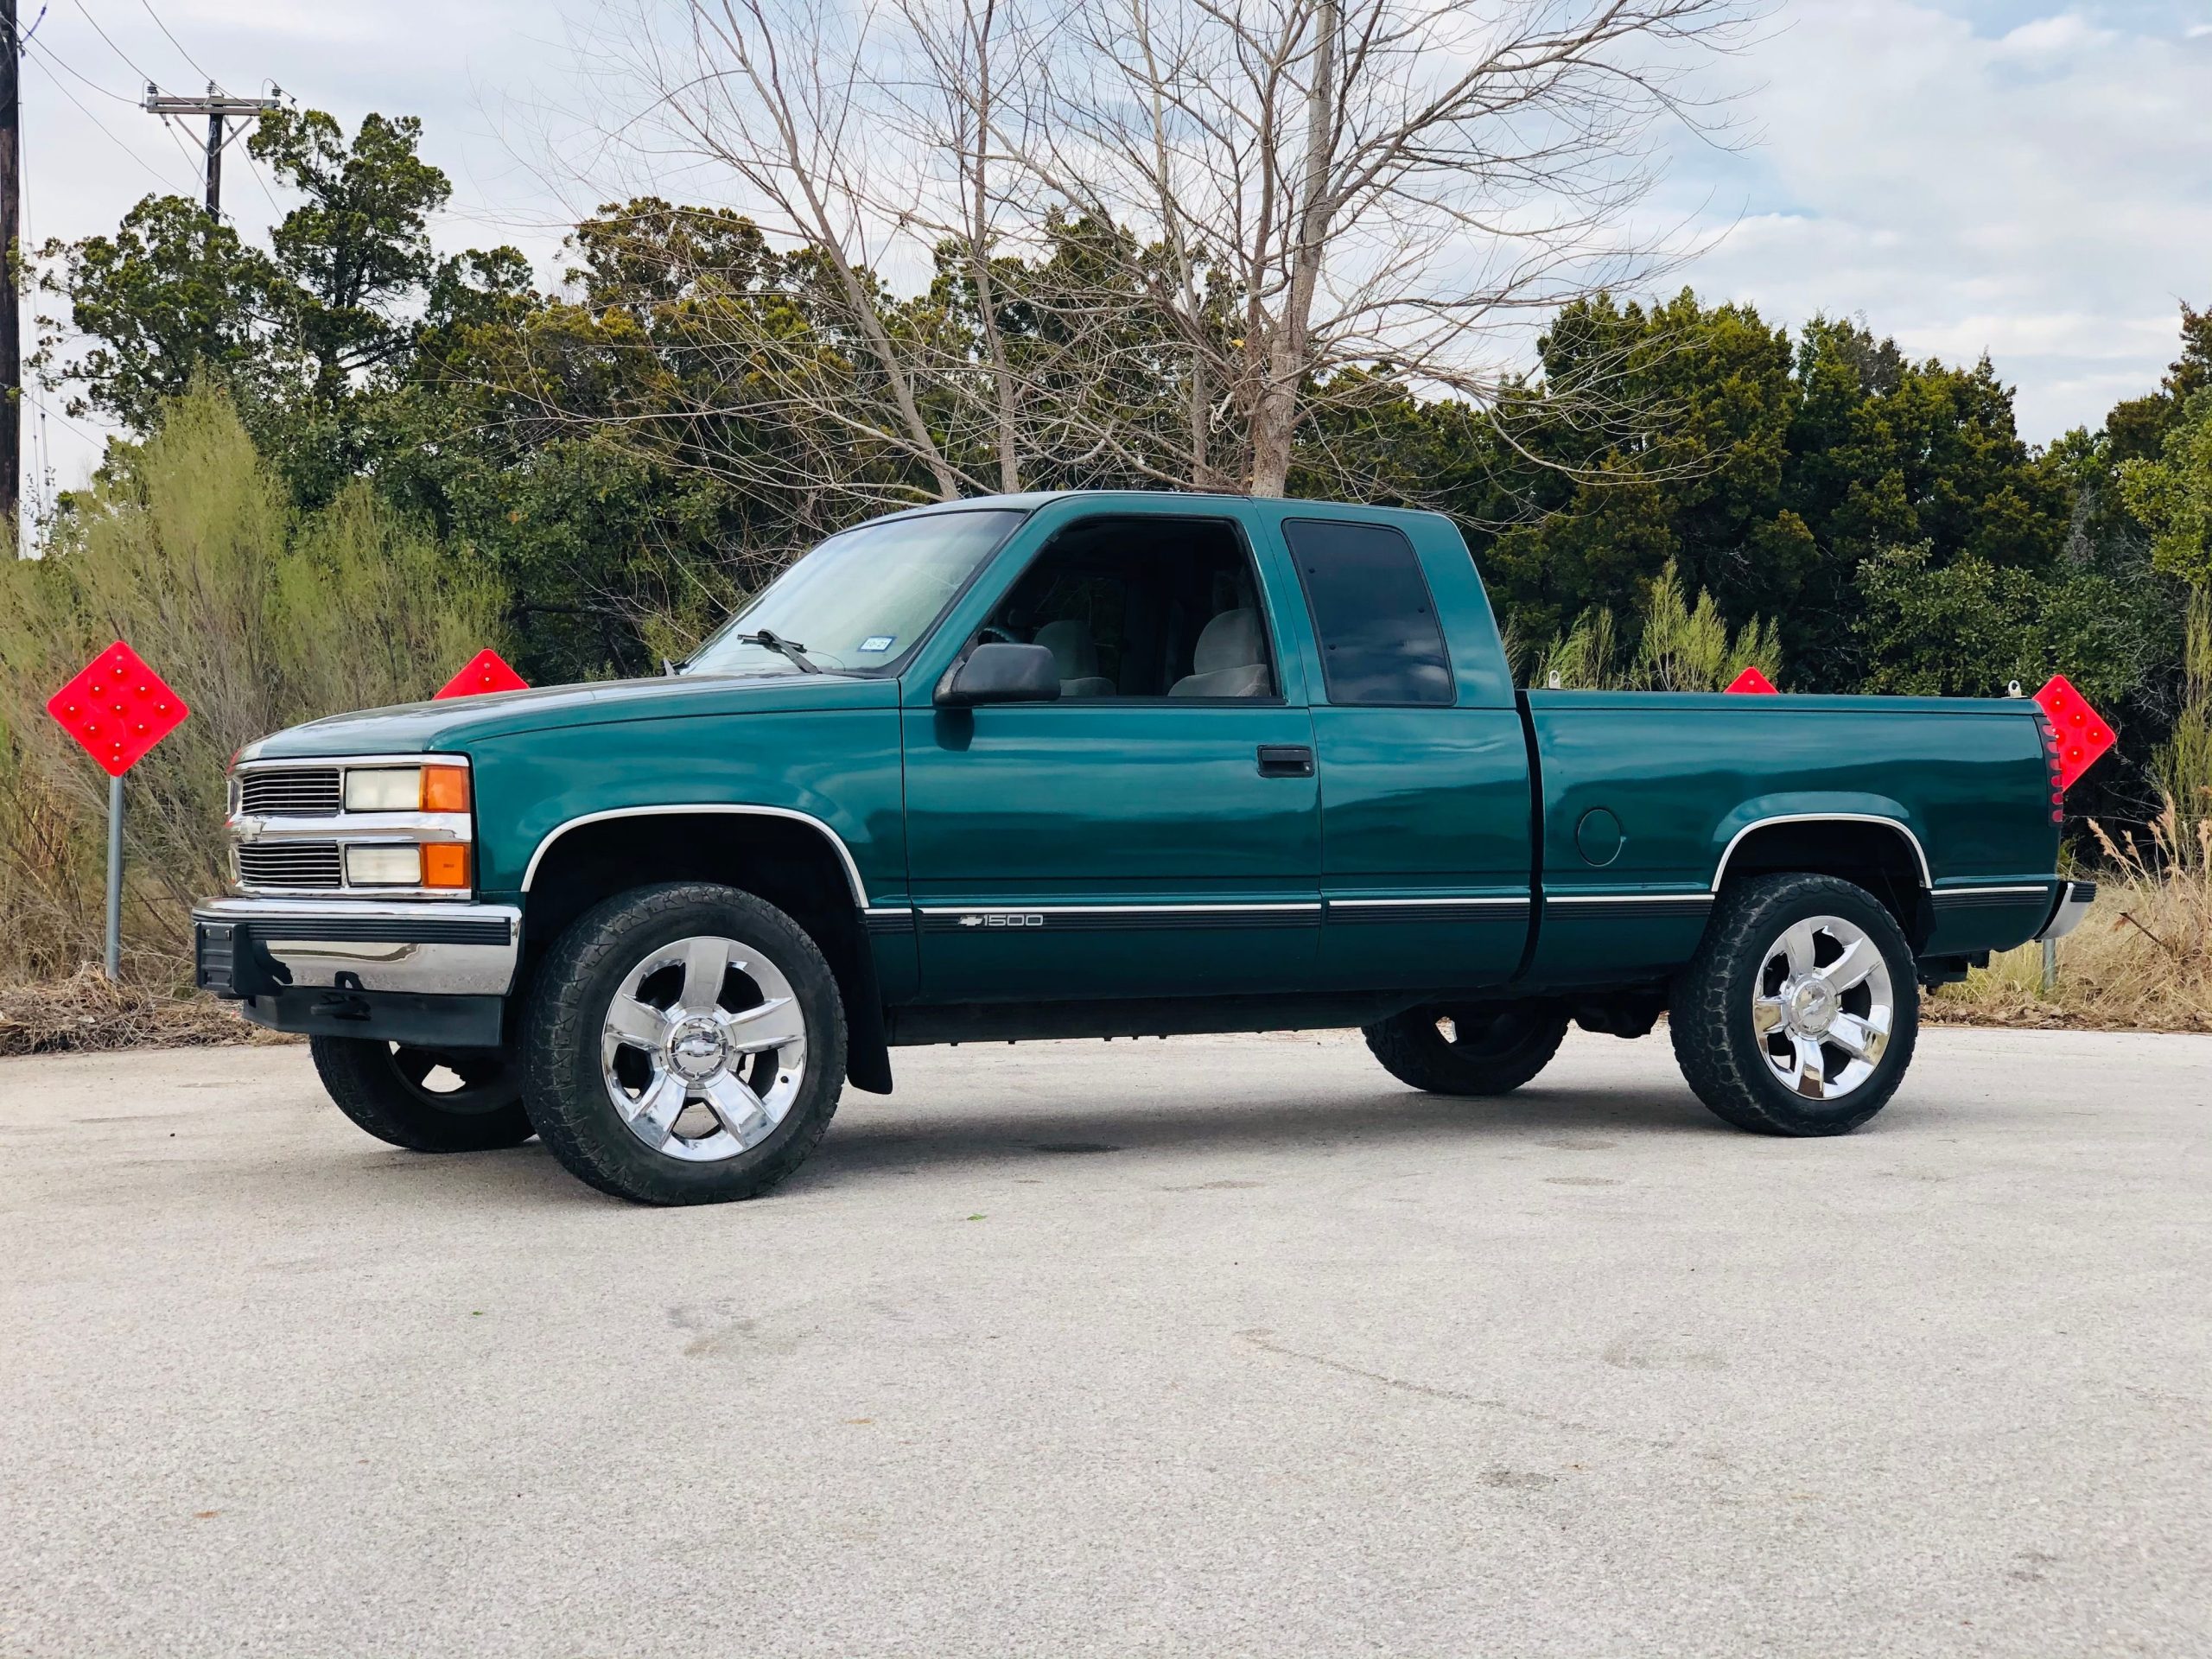 1998 Chevy Truck Starts but Won't Stay Running